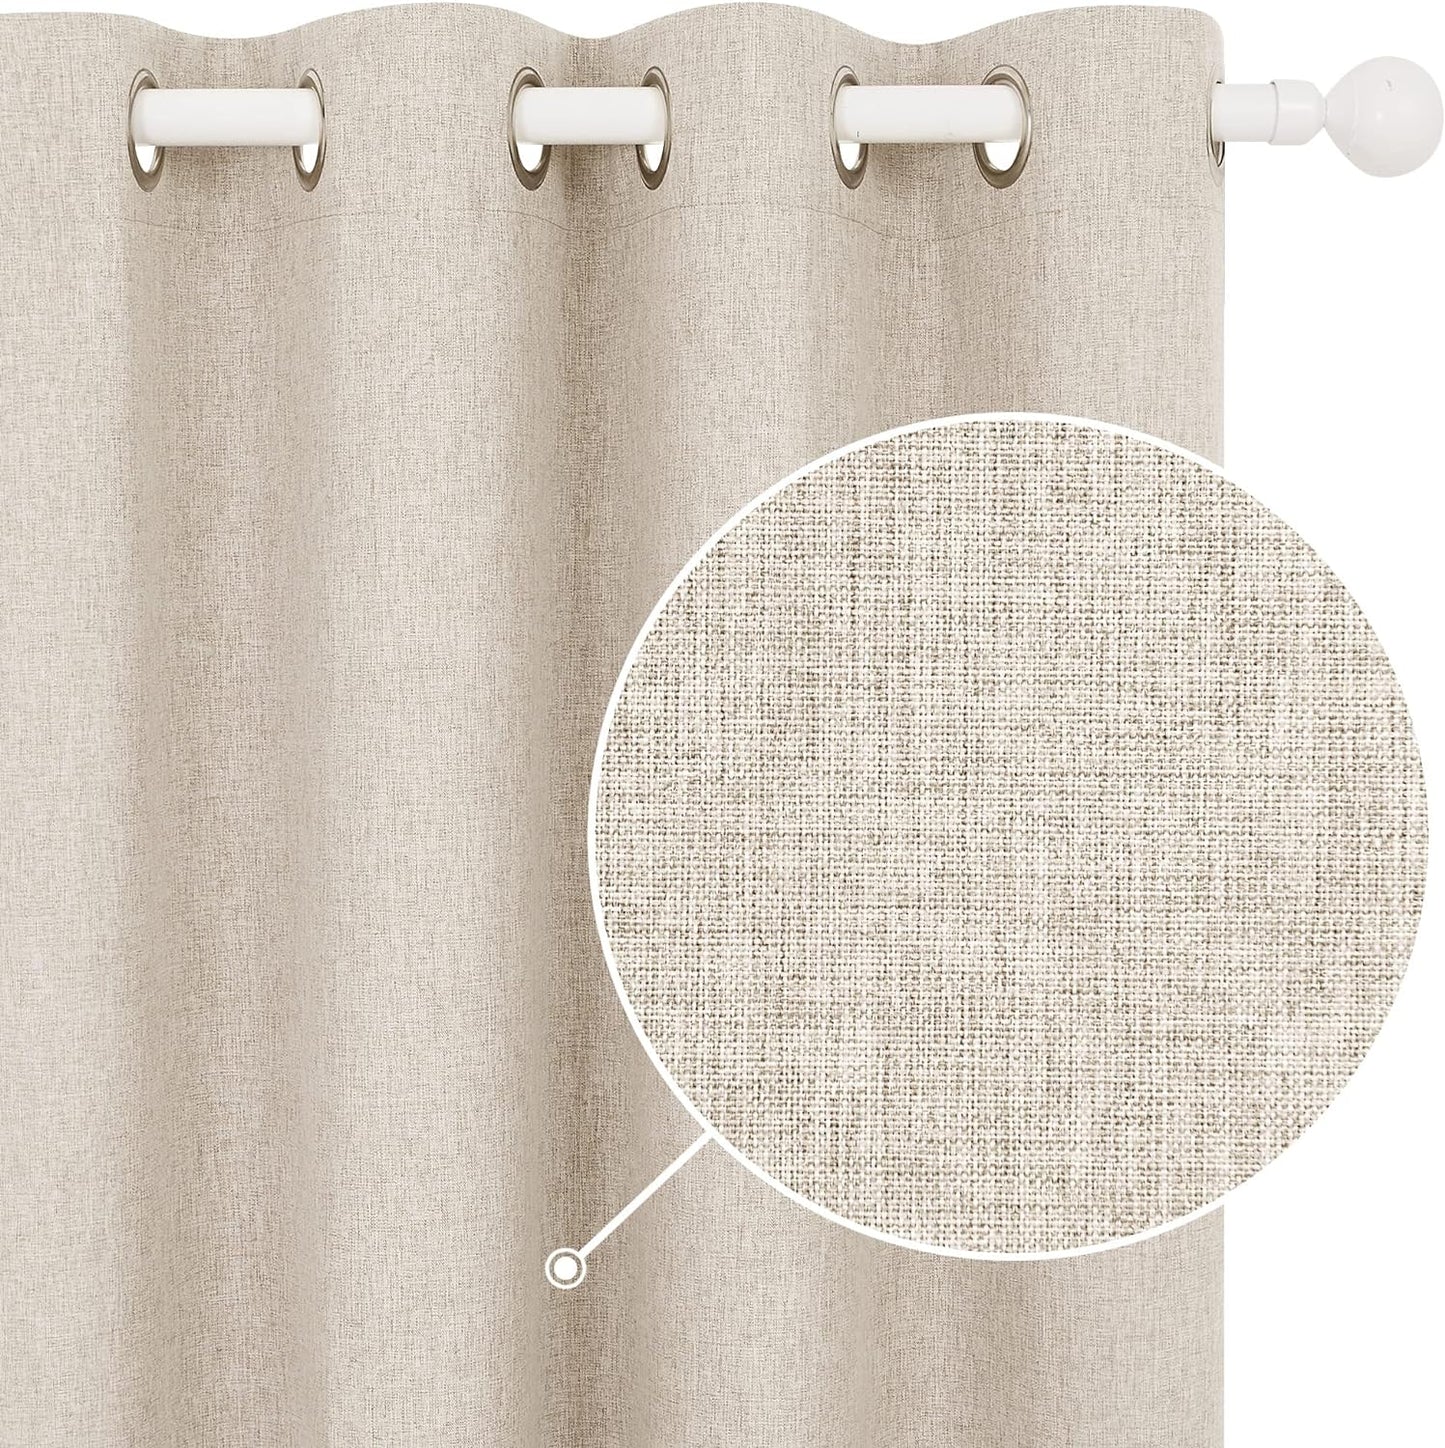 Deconovo Faux Linen Total Blackout Curtains 63 Inches Length, Light Blue, Grommet Thermal Insulated Curtain, Noise Reduction Draperies for Bedroom Living Room, 52" W X 63" L, 1 Pair  DECONOVO Khaki 52Wx72L Inch 